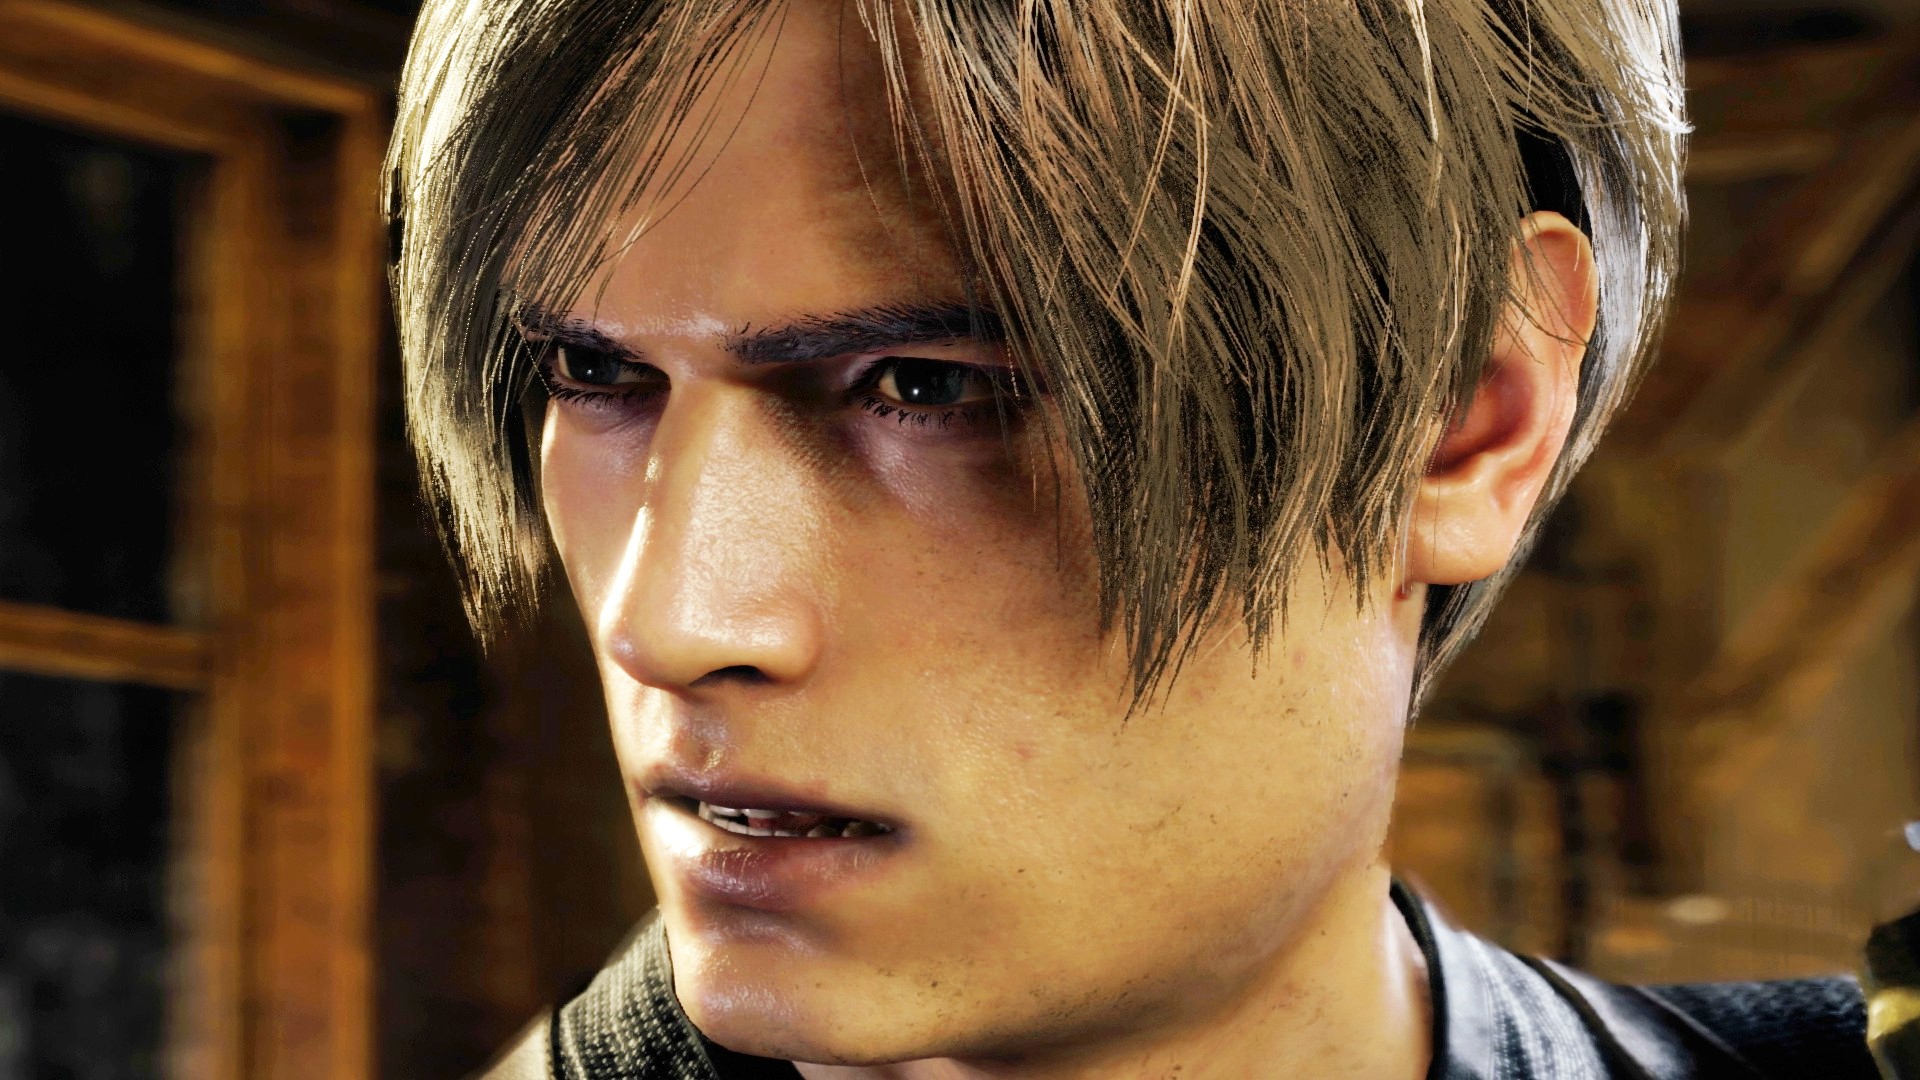 Get Resident Evil 4 Remake for 15% off – here's the best deal